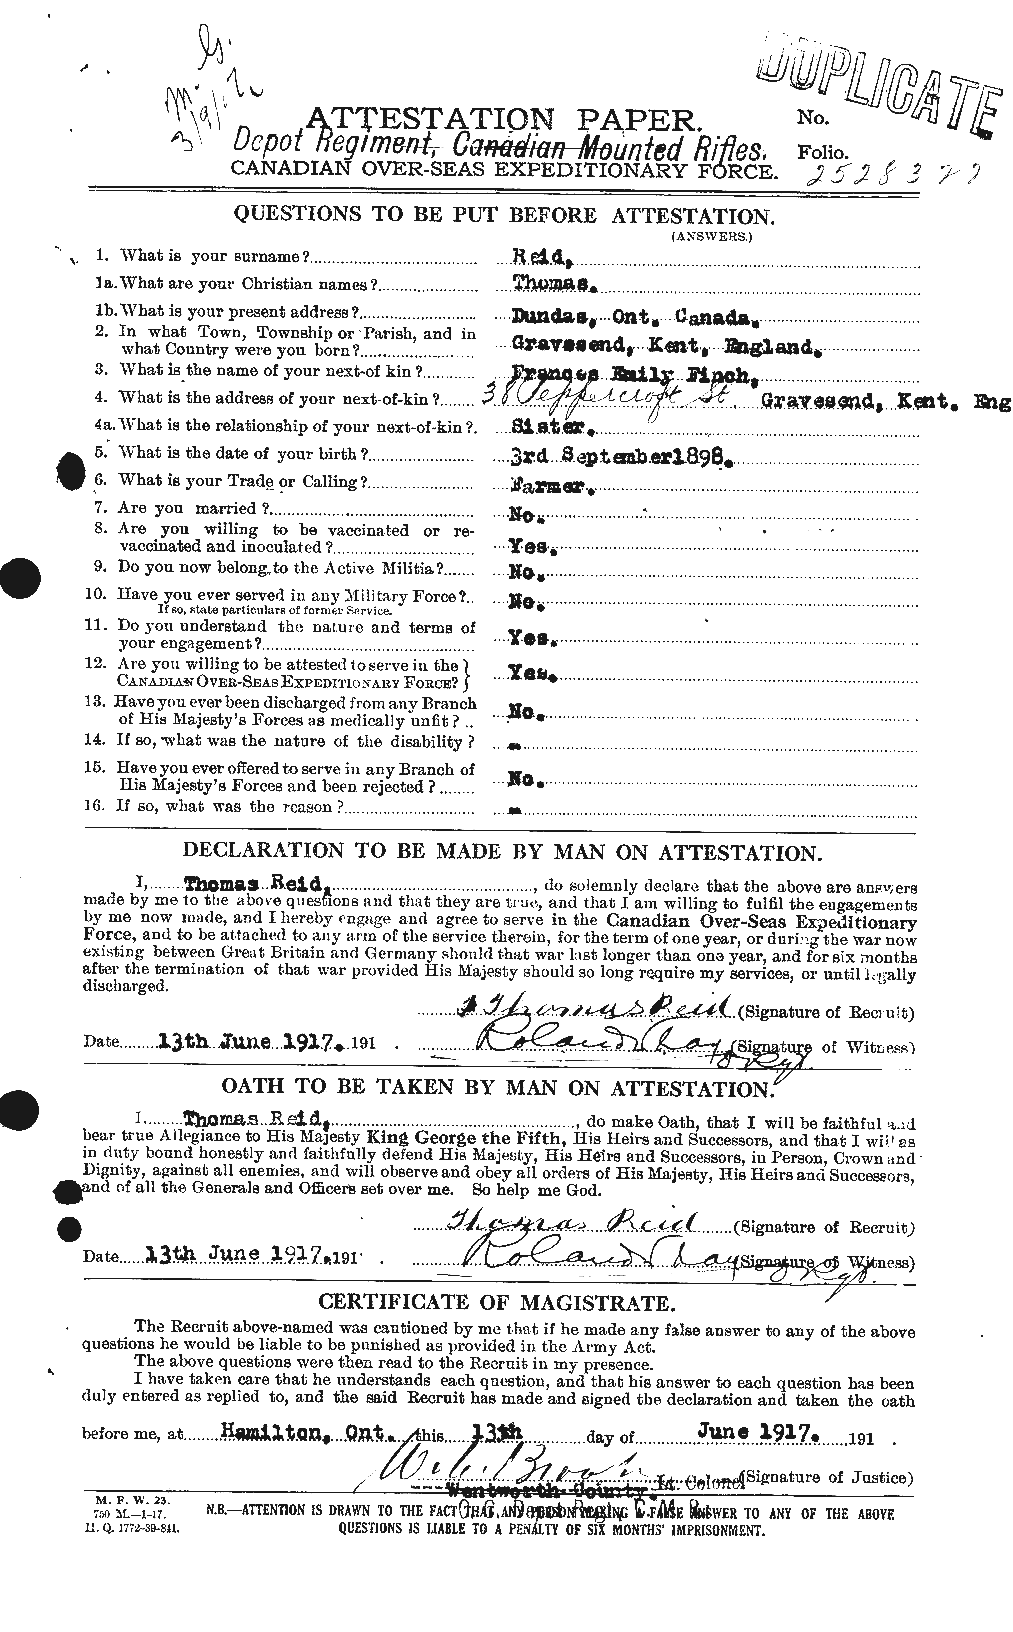 Personnel Records of the First World War - CEF 601983a